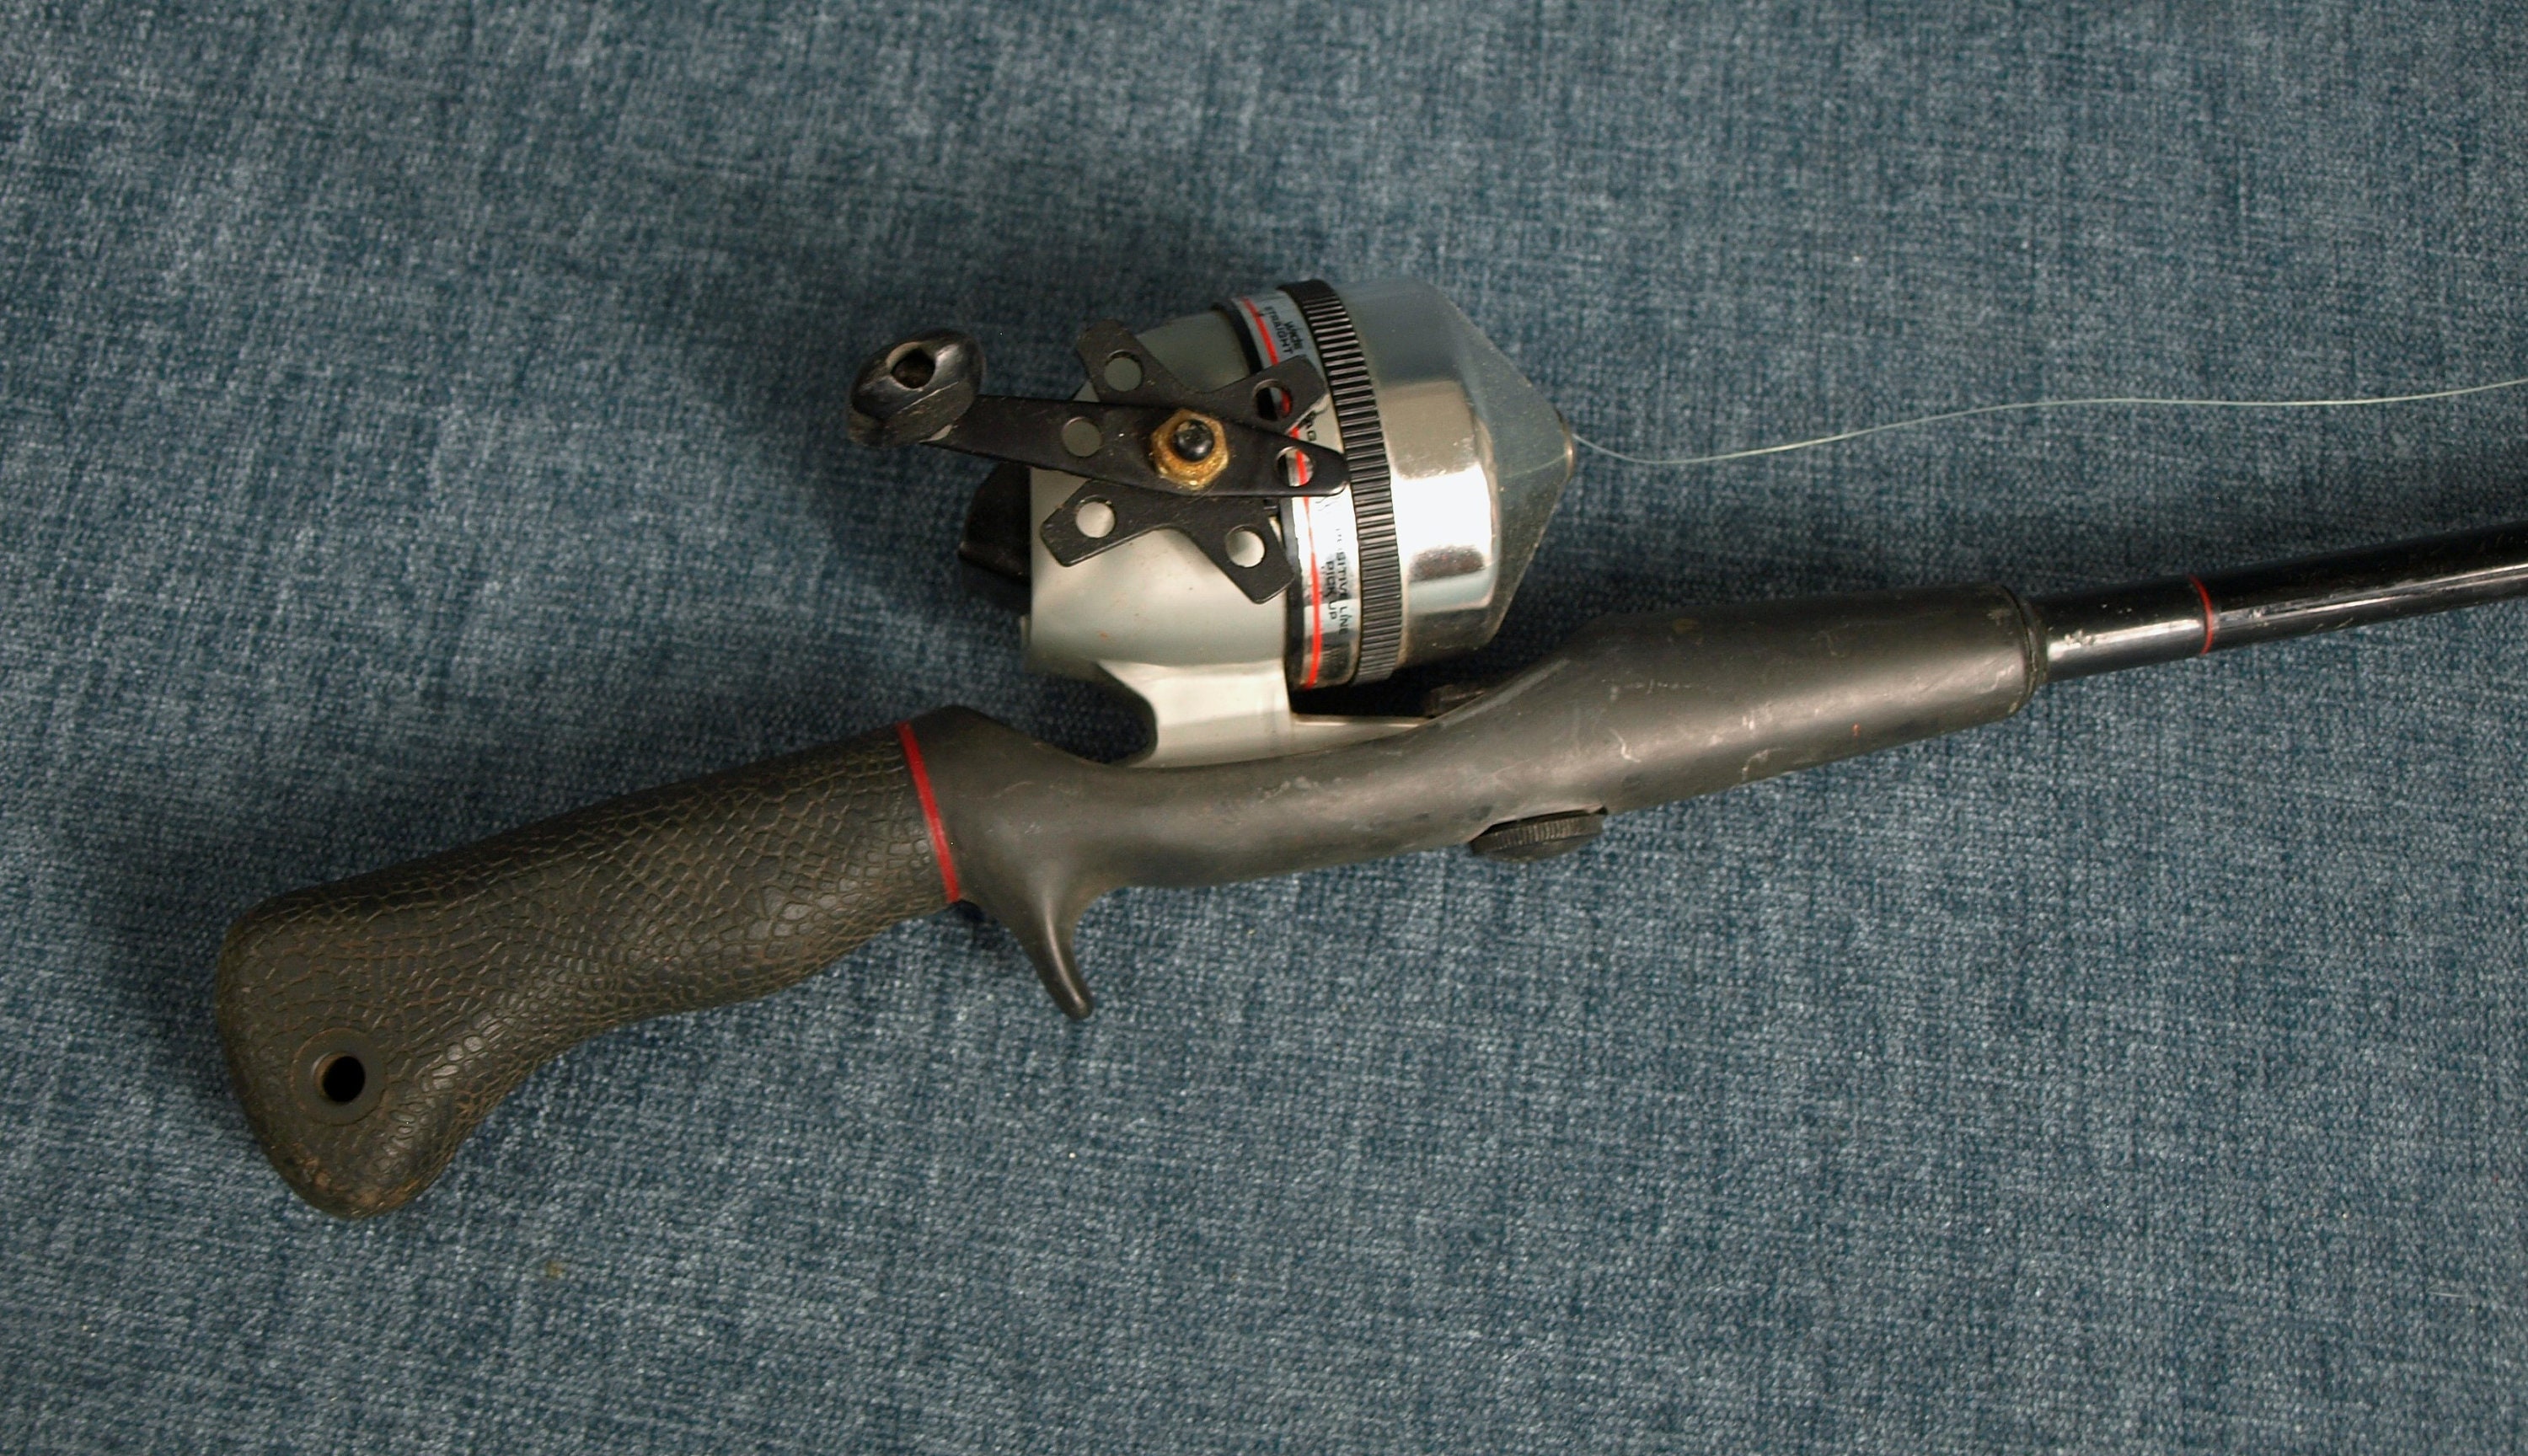 Reserved Vintage Shiman AC-1552 Pistol Grip Fishing Rod 5'6 Line Wt. 6-12  Lb Lure Wt 1/8-3/4 Oz With Zebco 10/20 USA Spin Cast Reel -  Singapore